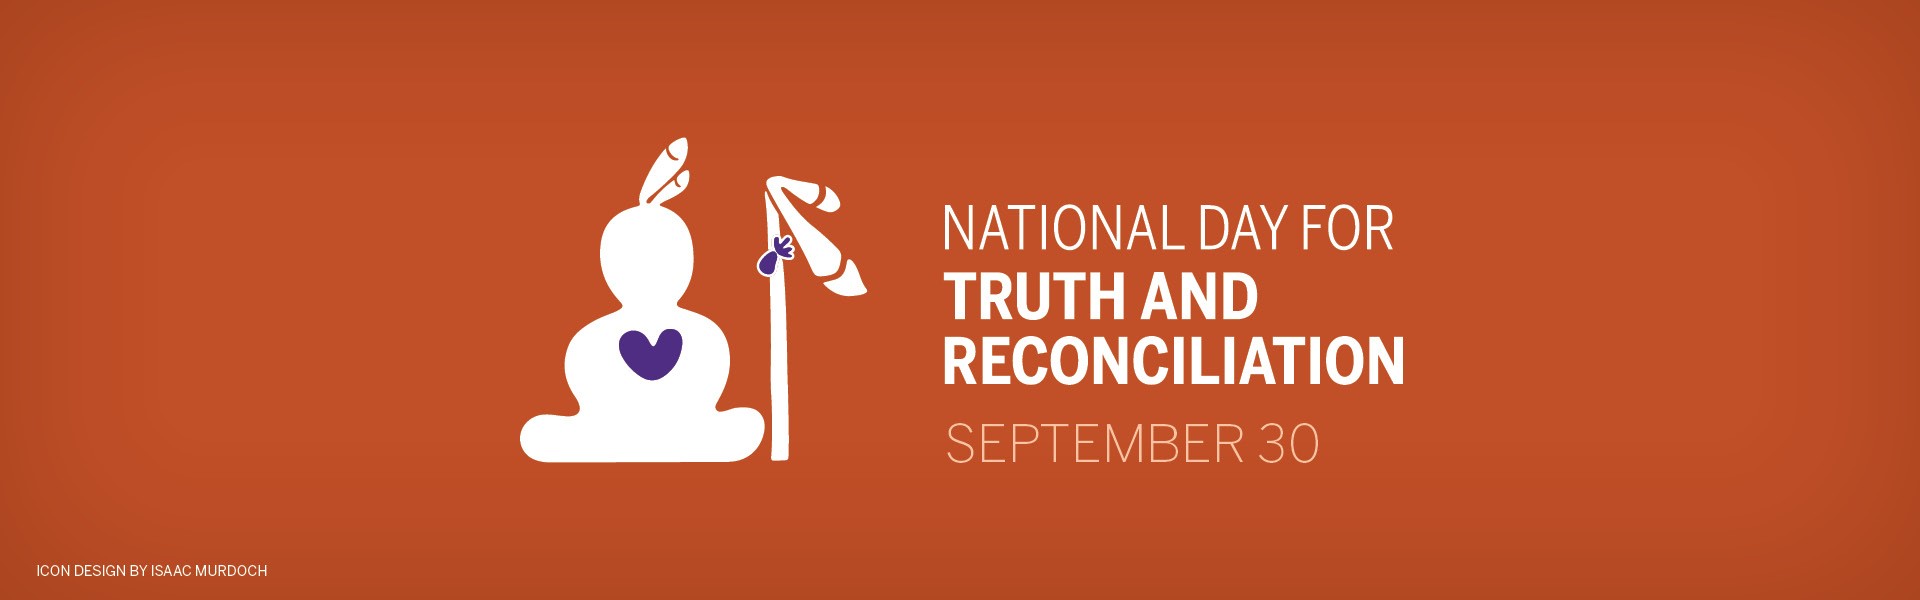 September 30th National Day for Truth & Reconciliation